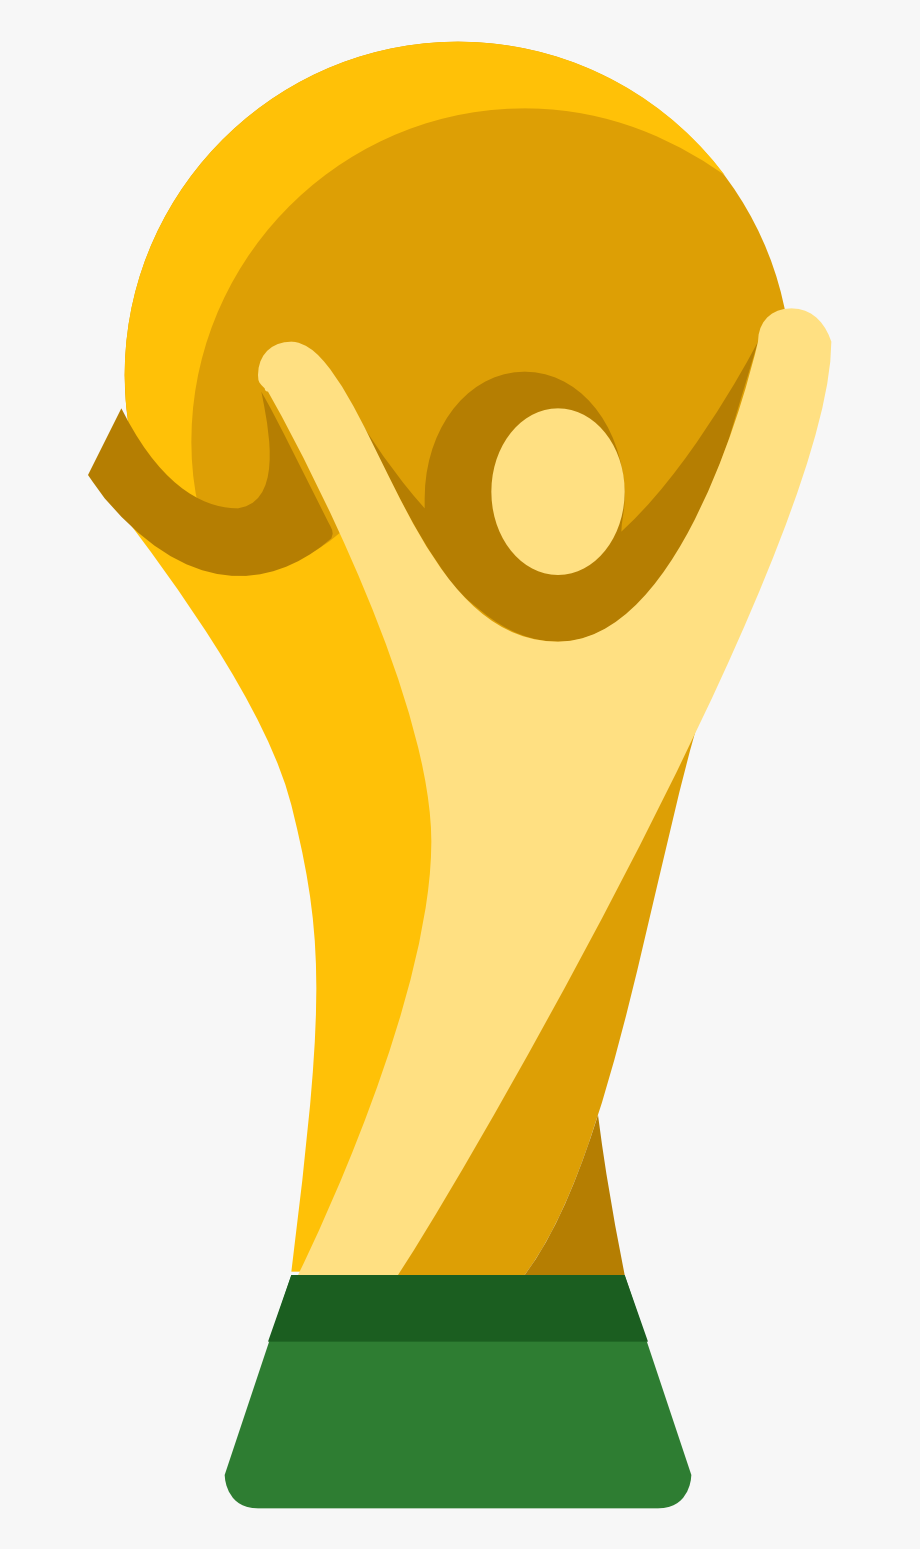 World cup trophy.